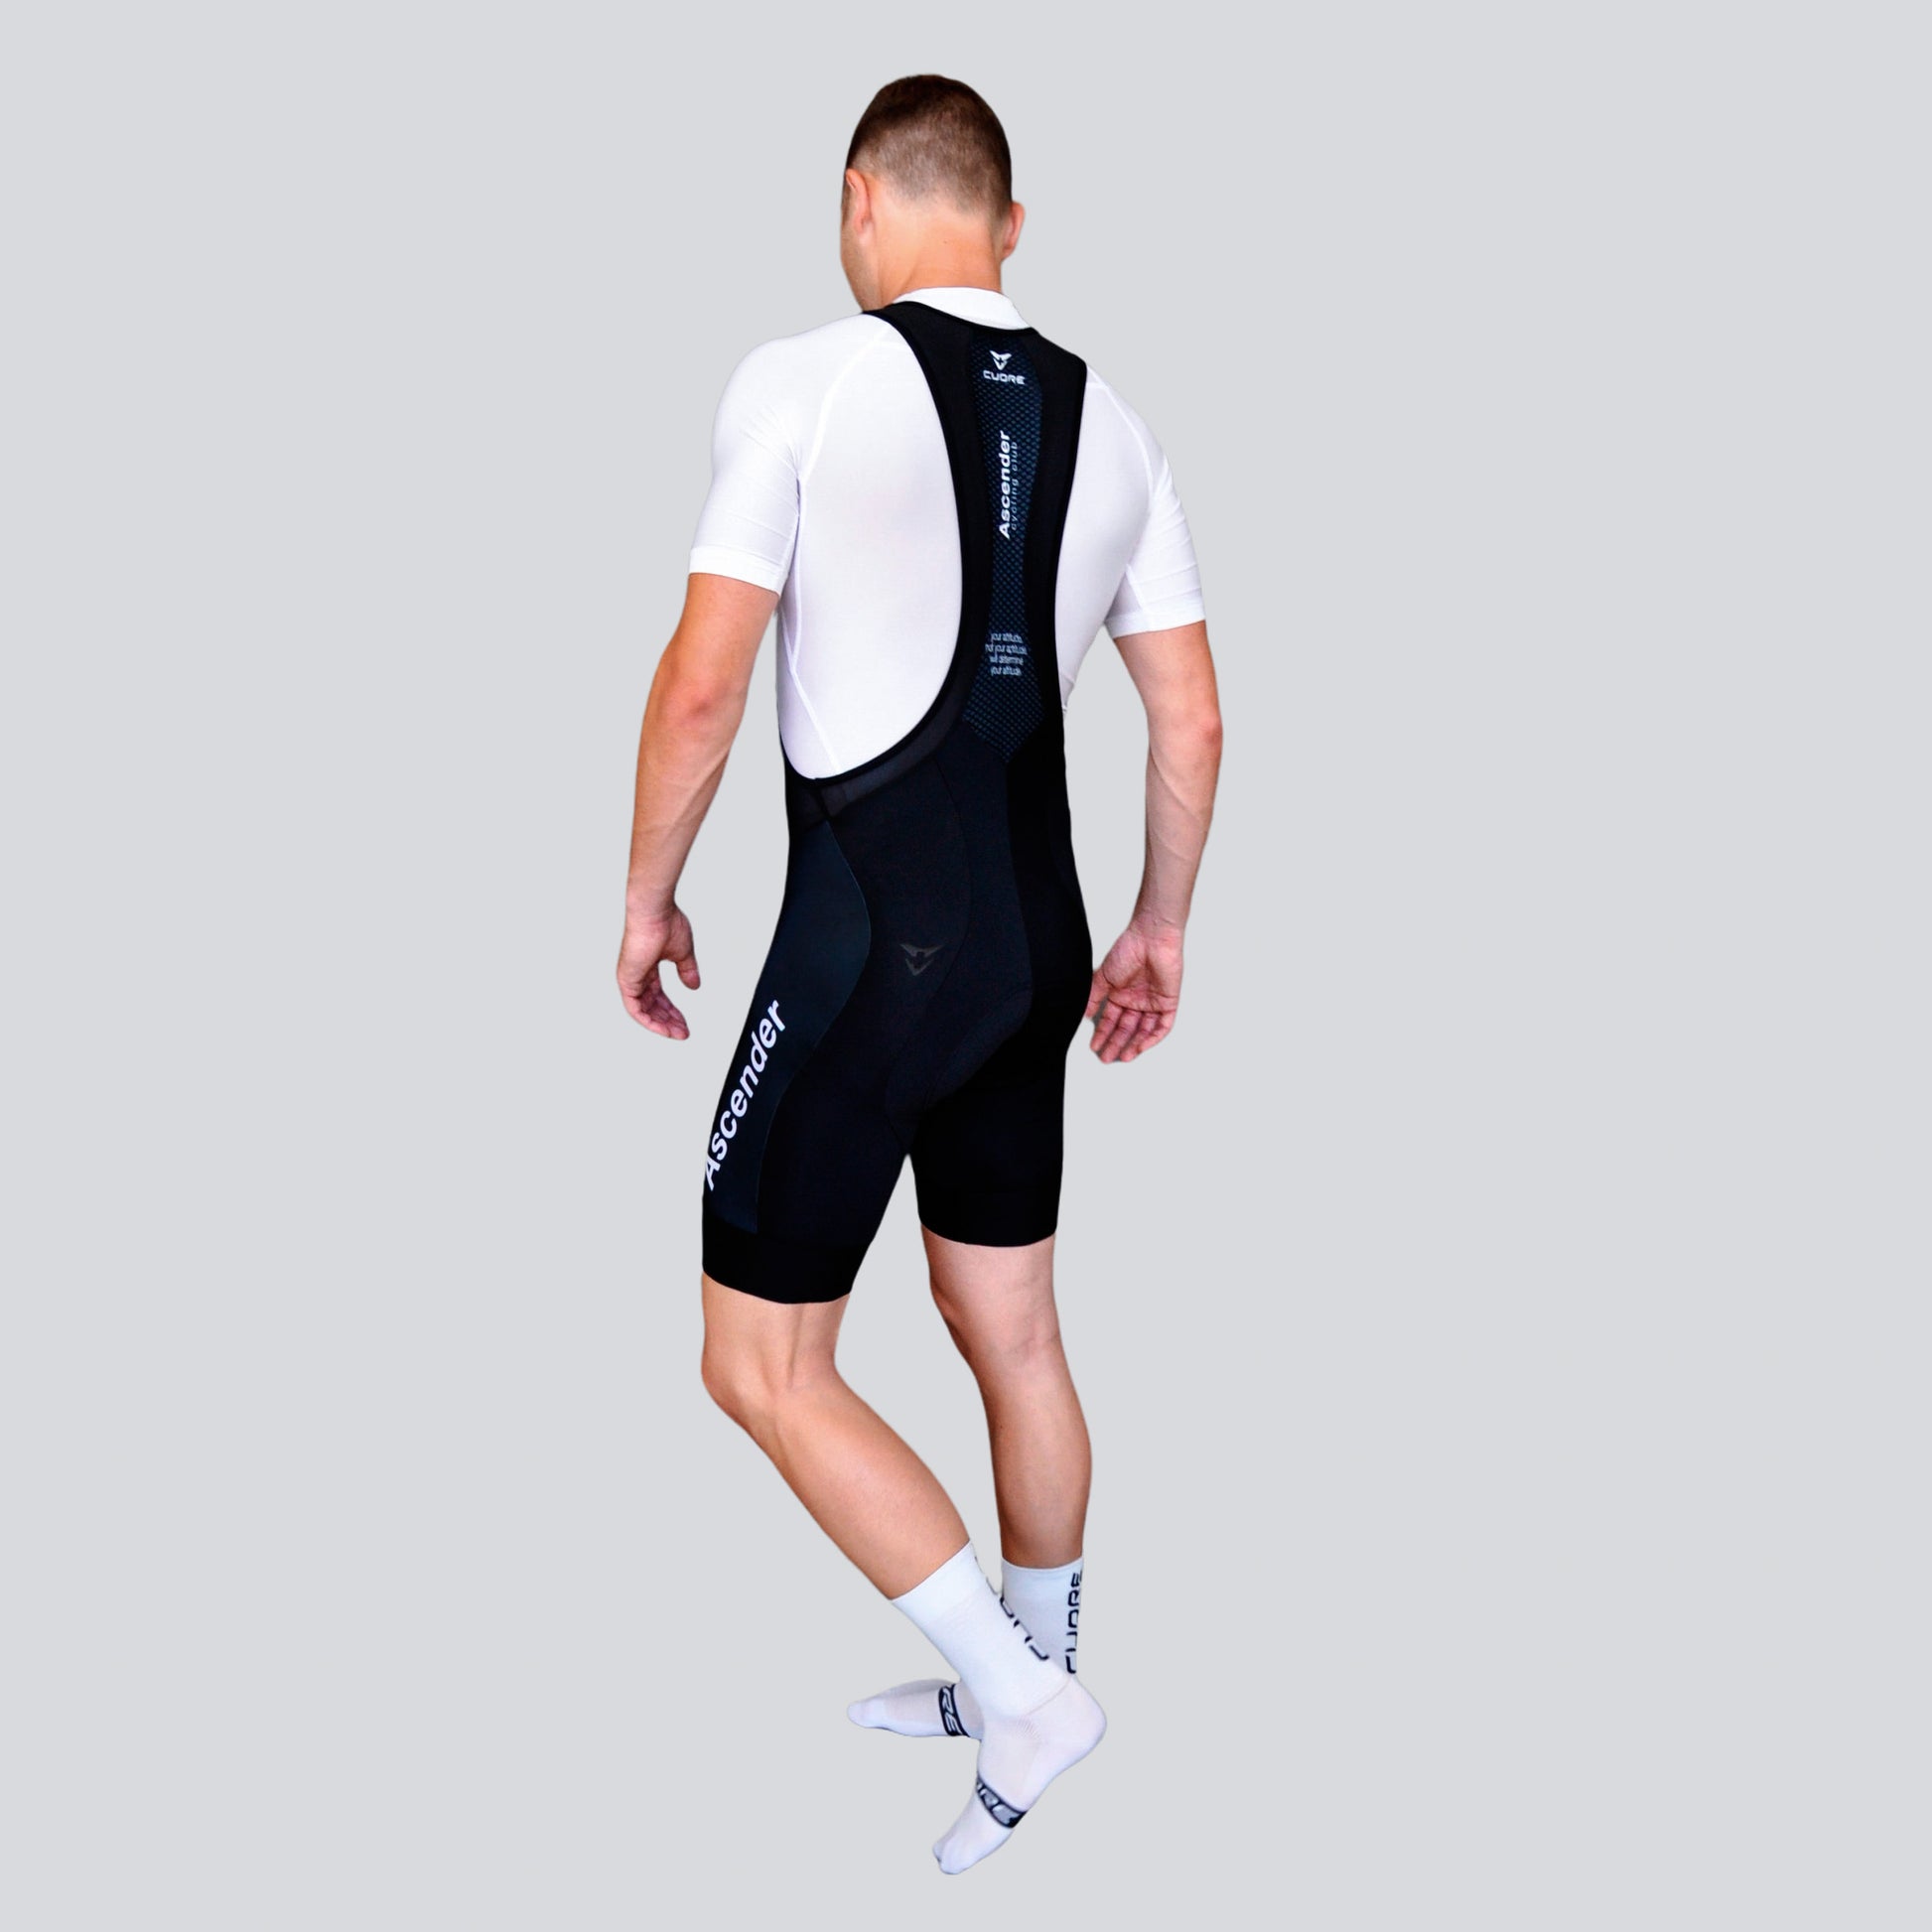 Classic Ascender Black Bib Short from Ascender Cycling Club Global Back Side View